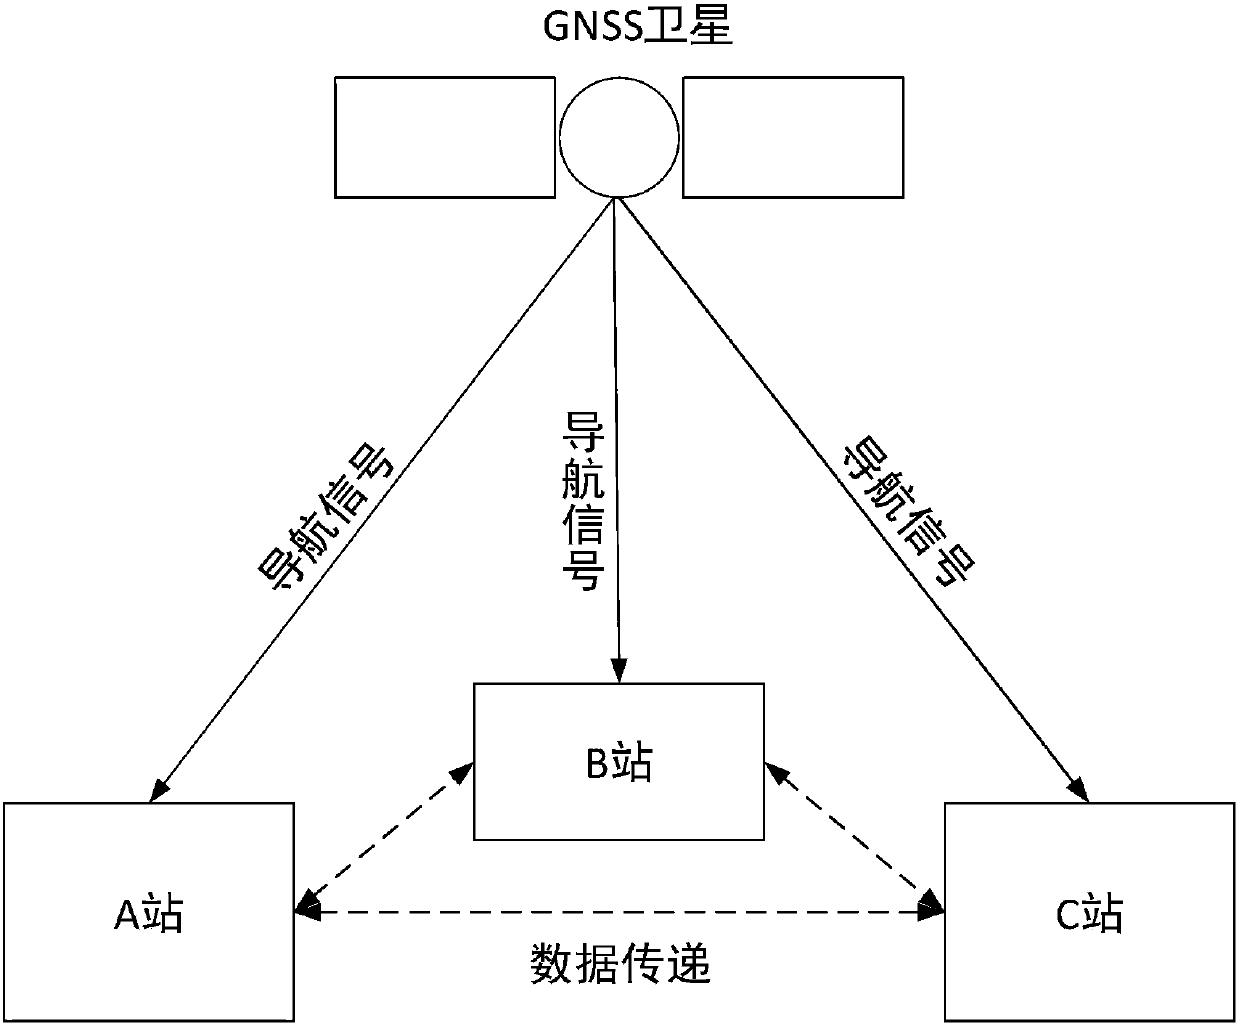 Time frequency transmission receiver containing GNSS common view comparison algorithm